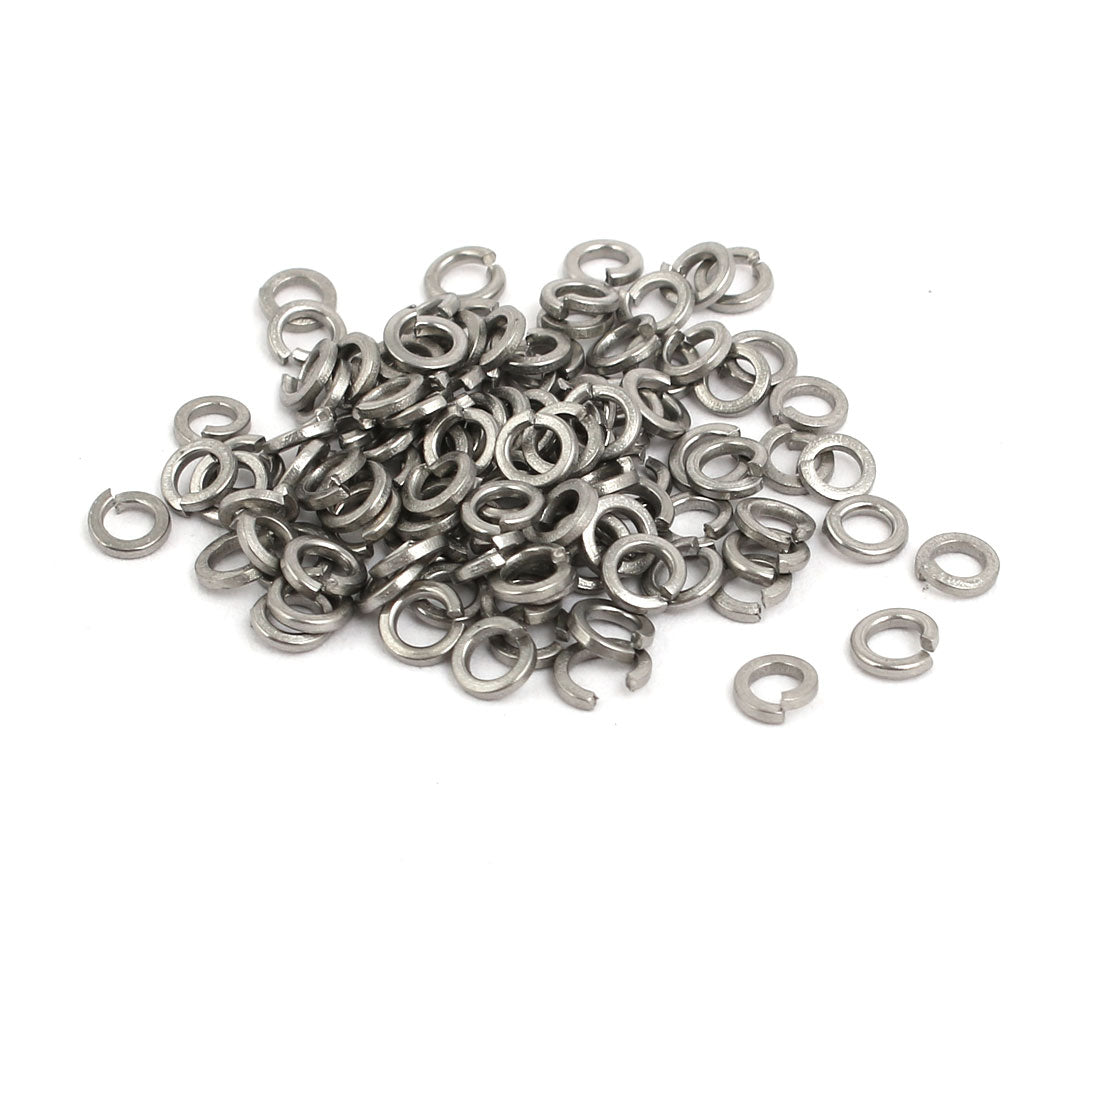 uxcell Uxcell M2 304 Stainless Steel Split Lock Washer Silver Tone 100pcs